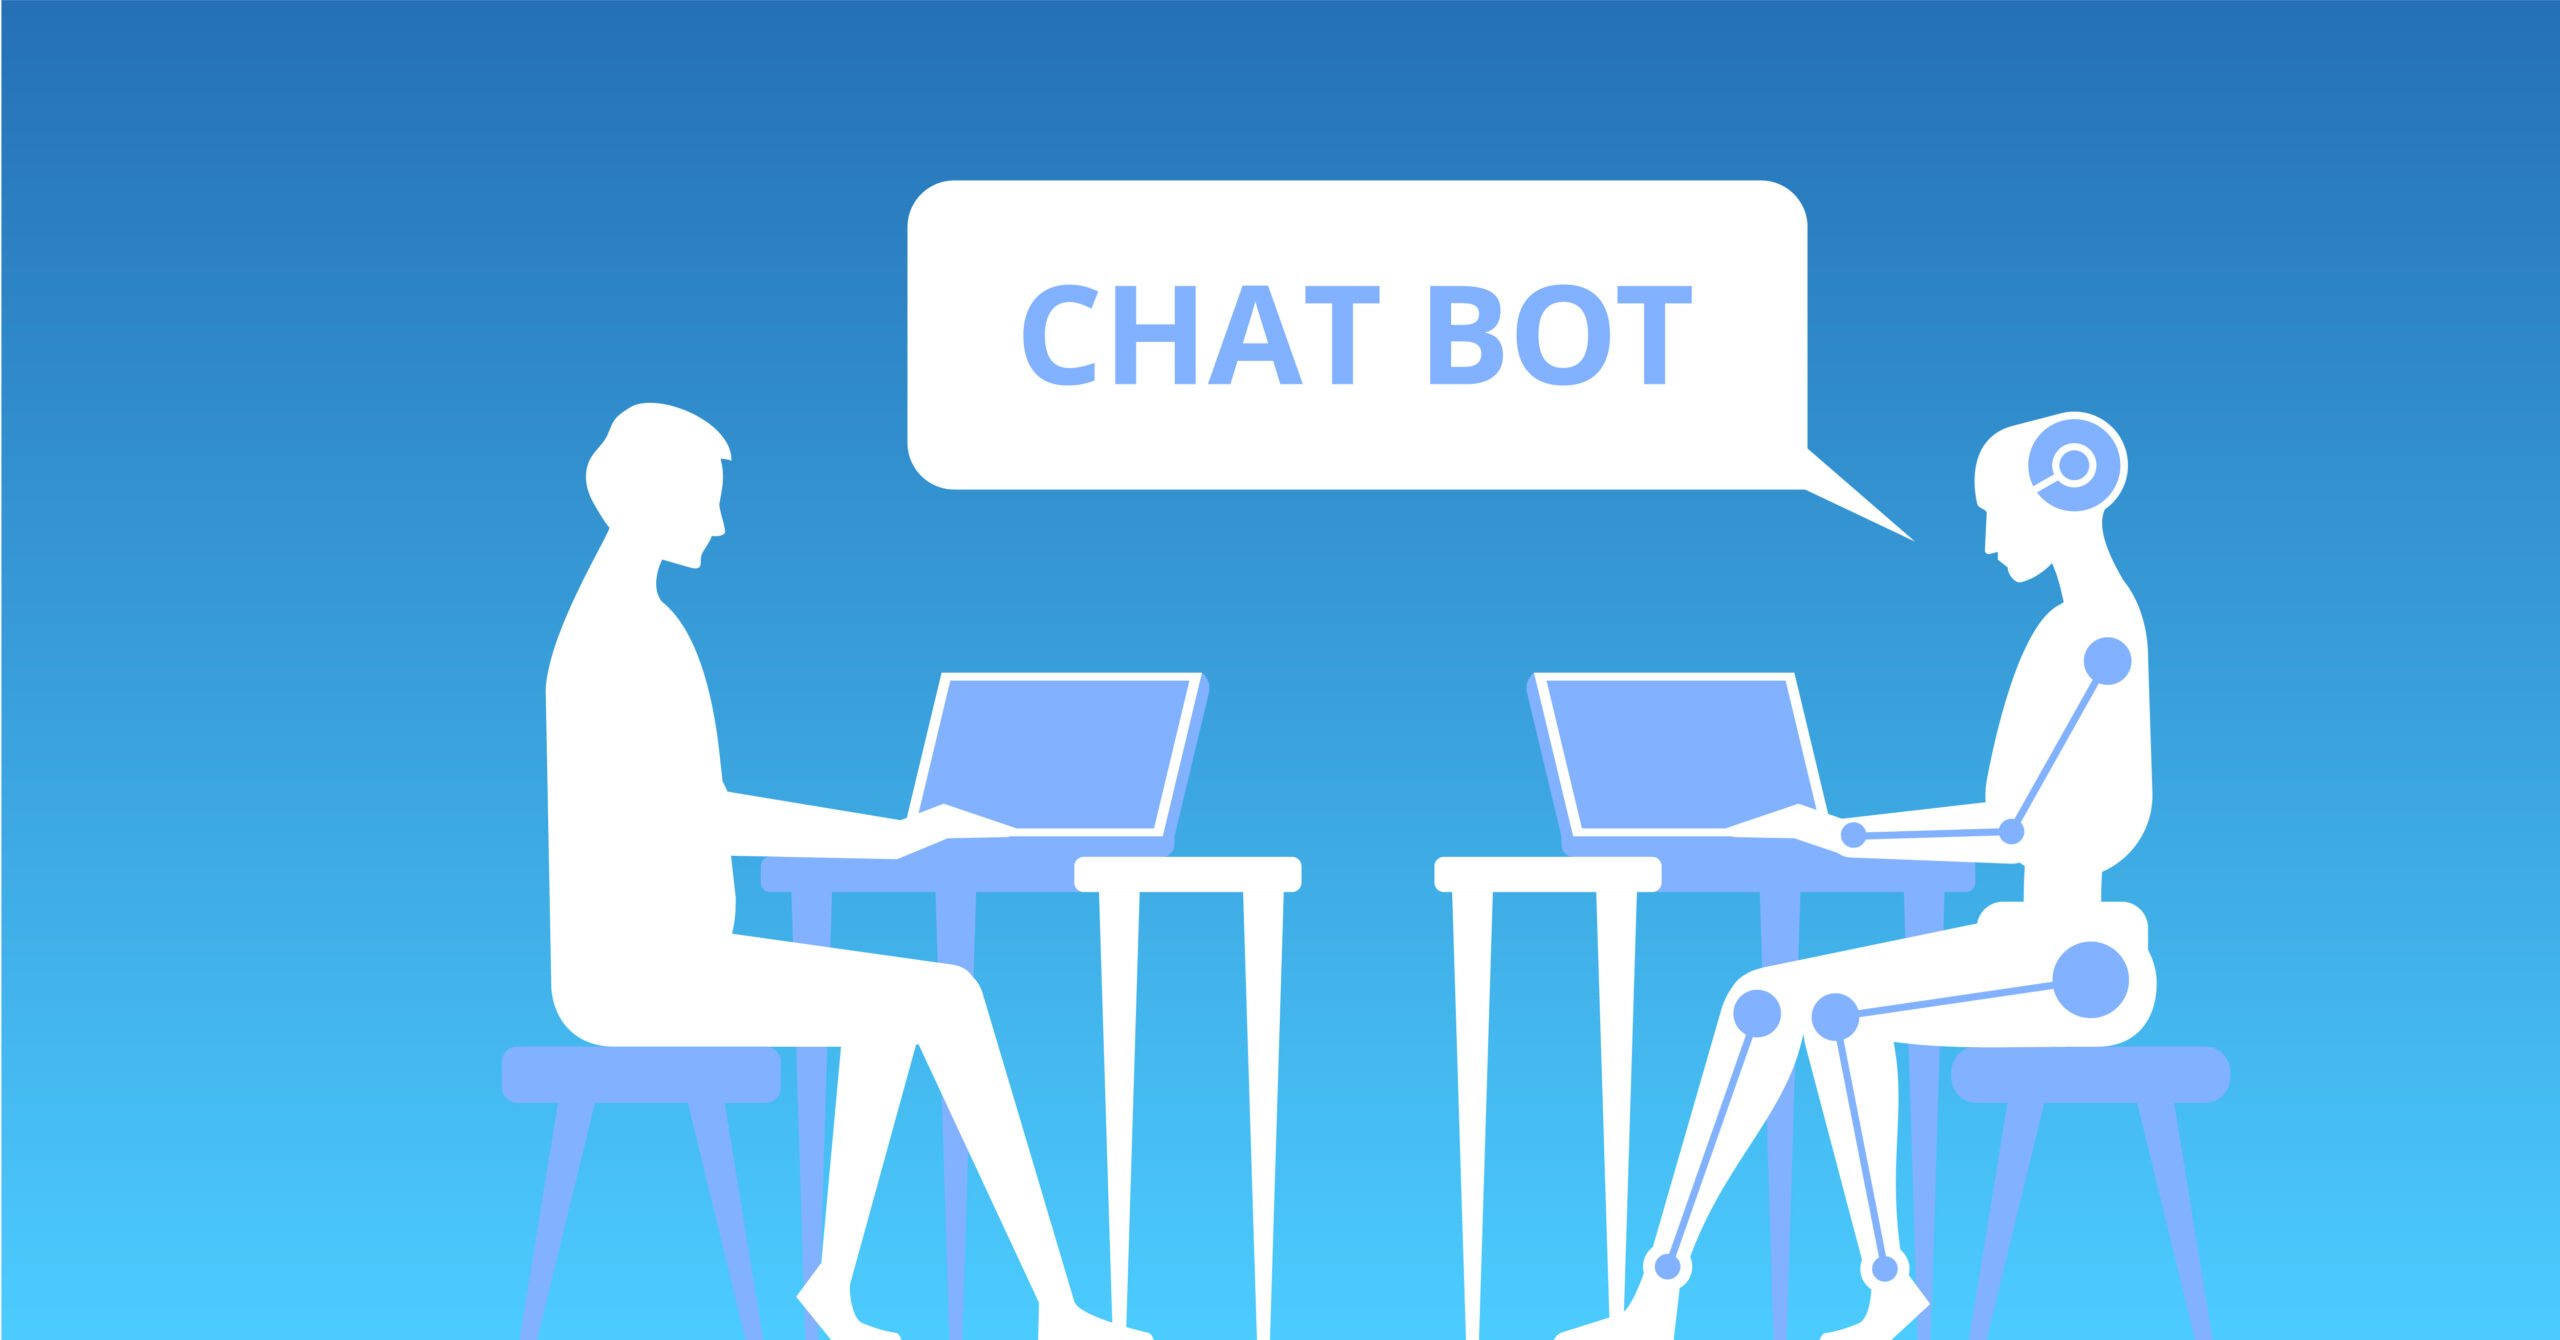 Chatbots Disrupting the Digital World of Business